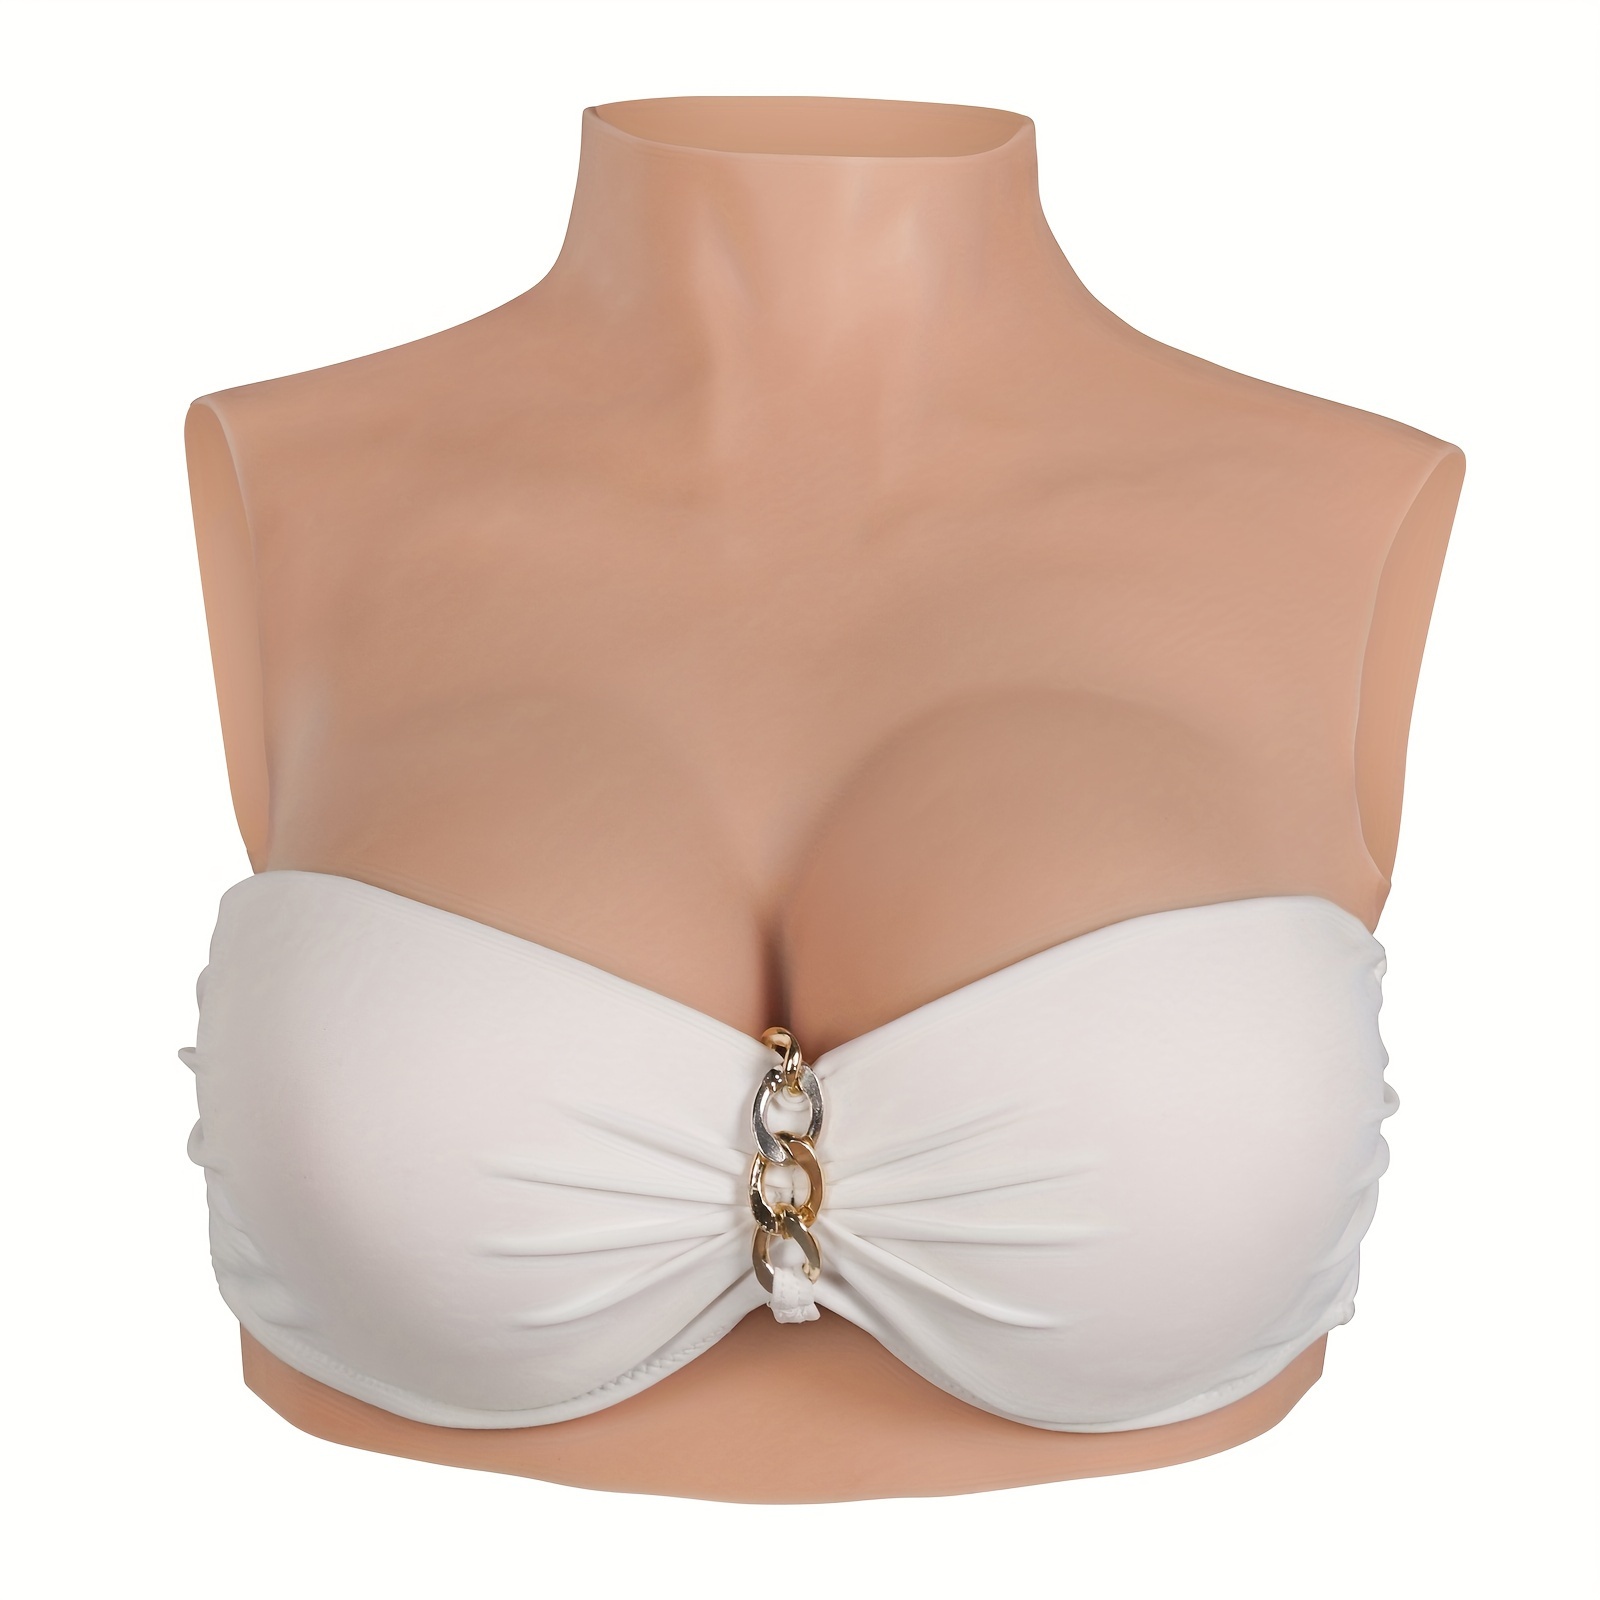 Silicone Breast Forms for Crossdressing - Realistic Fake Boobs, Suitable  for Transgender, Drag Queens, Post-Mastectomy